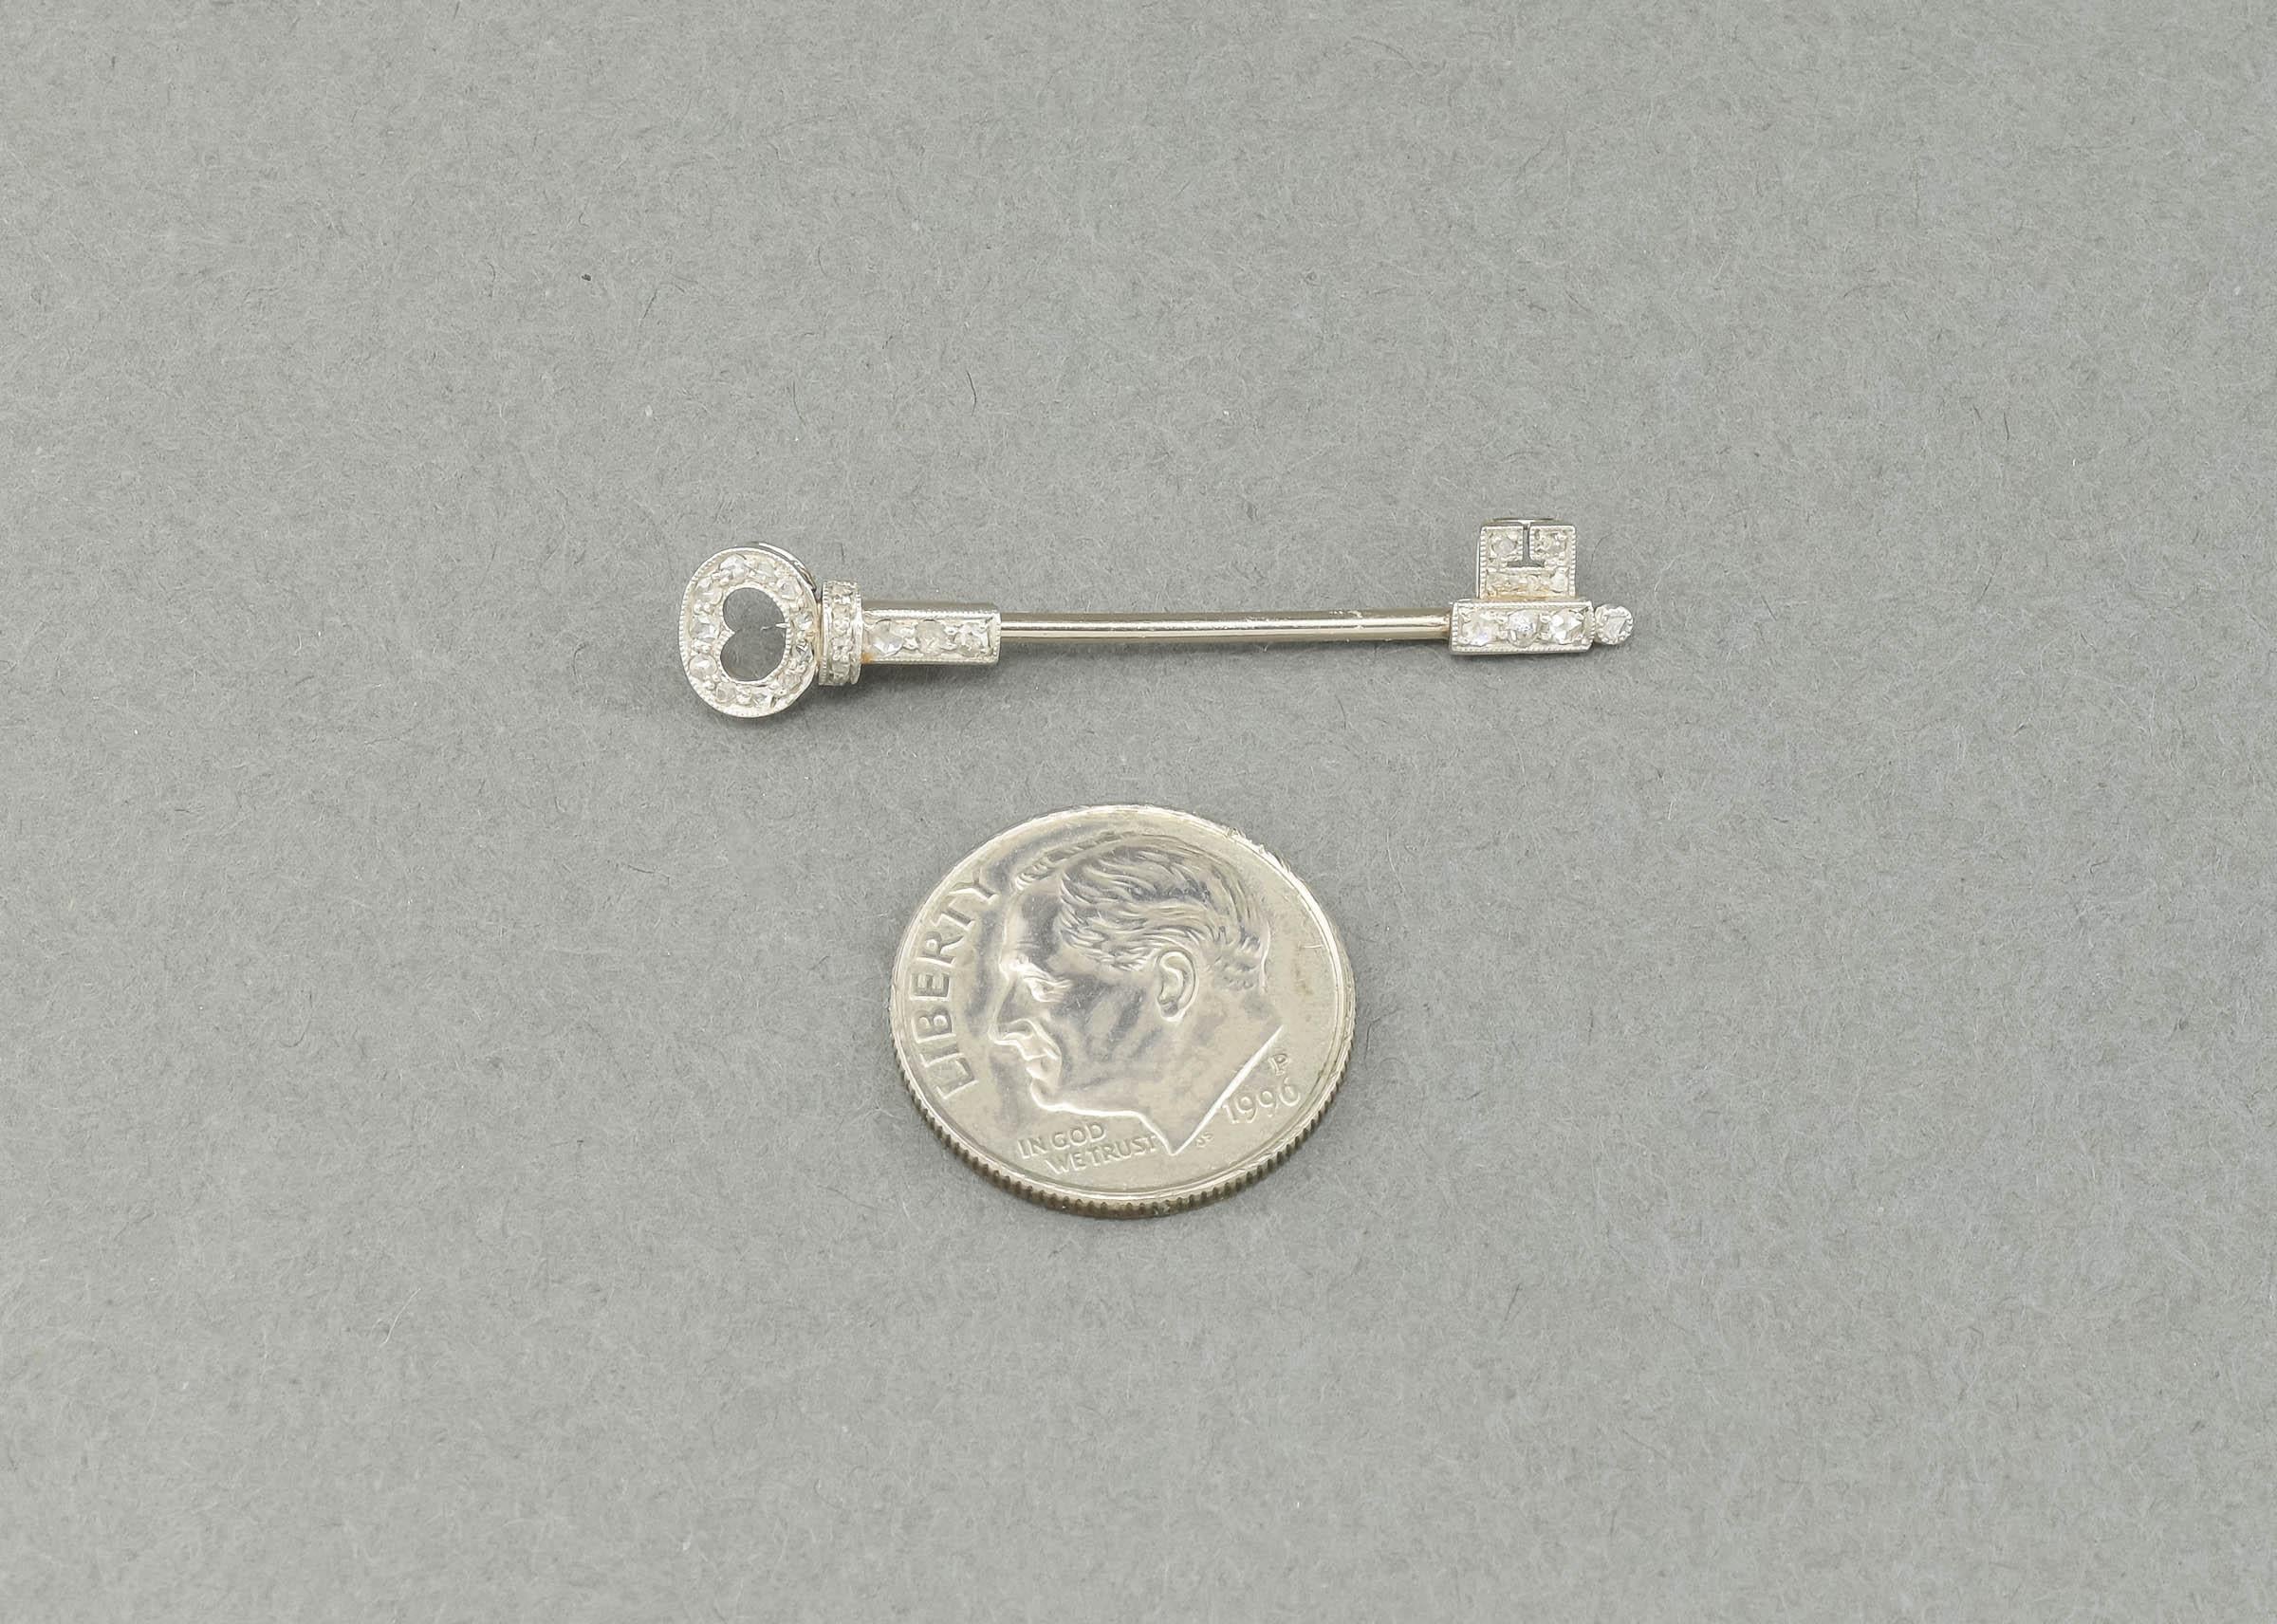 Art Deco Rose Cut Diamond Skeleton Key Jabot Pin in Platinum & 18K Gold In Good Condition For Sale In Danvers, MA